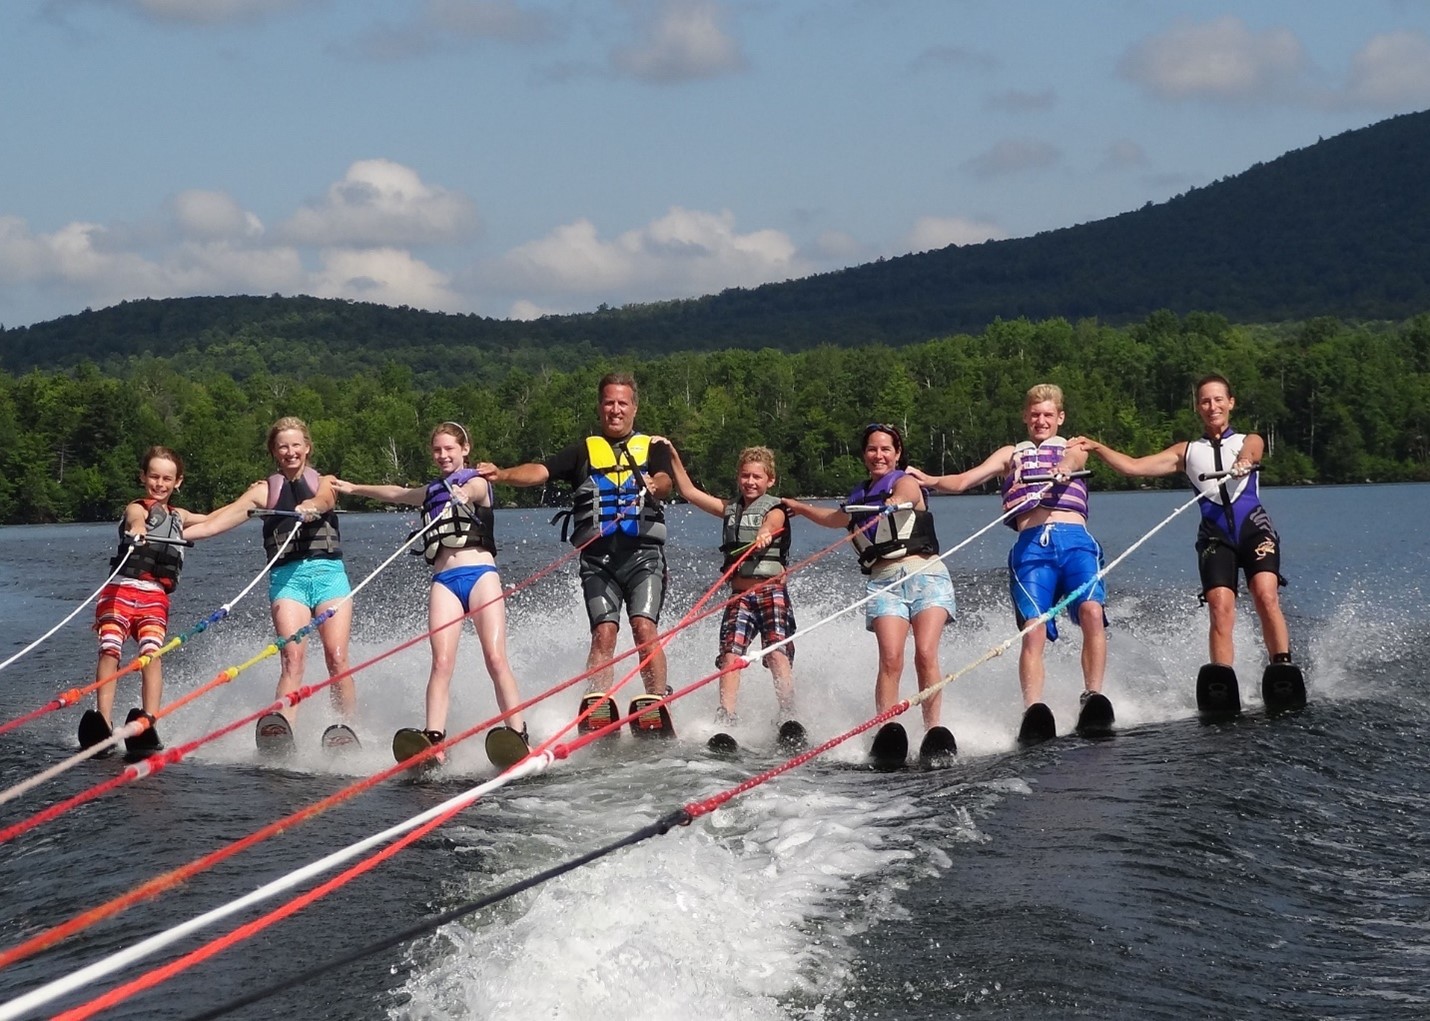 A photo of 8 people - men, women, girls and boys - waterskiing together in line with their arm on the person behind them.